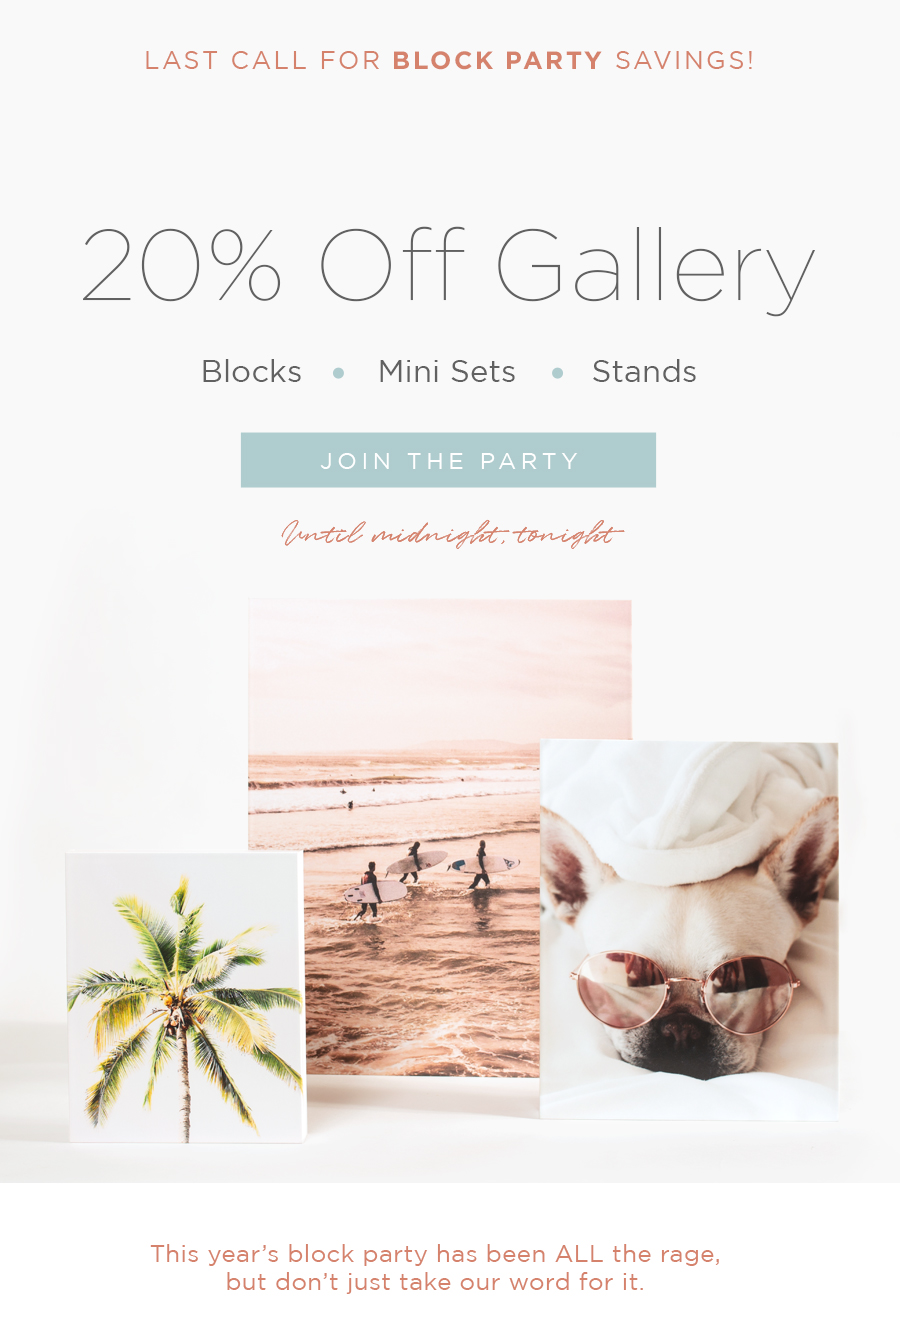 Last Call for Block Party Savings!  Enjoy 20% Off Gallery Blocks Mini Sets Stands  Until midnight, tonight  JOIN THE PARTY